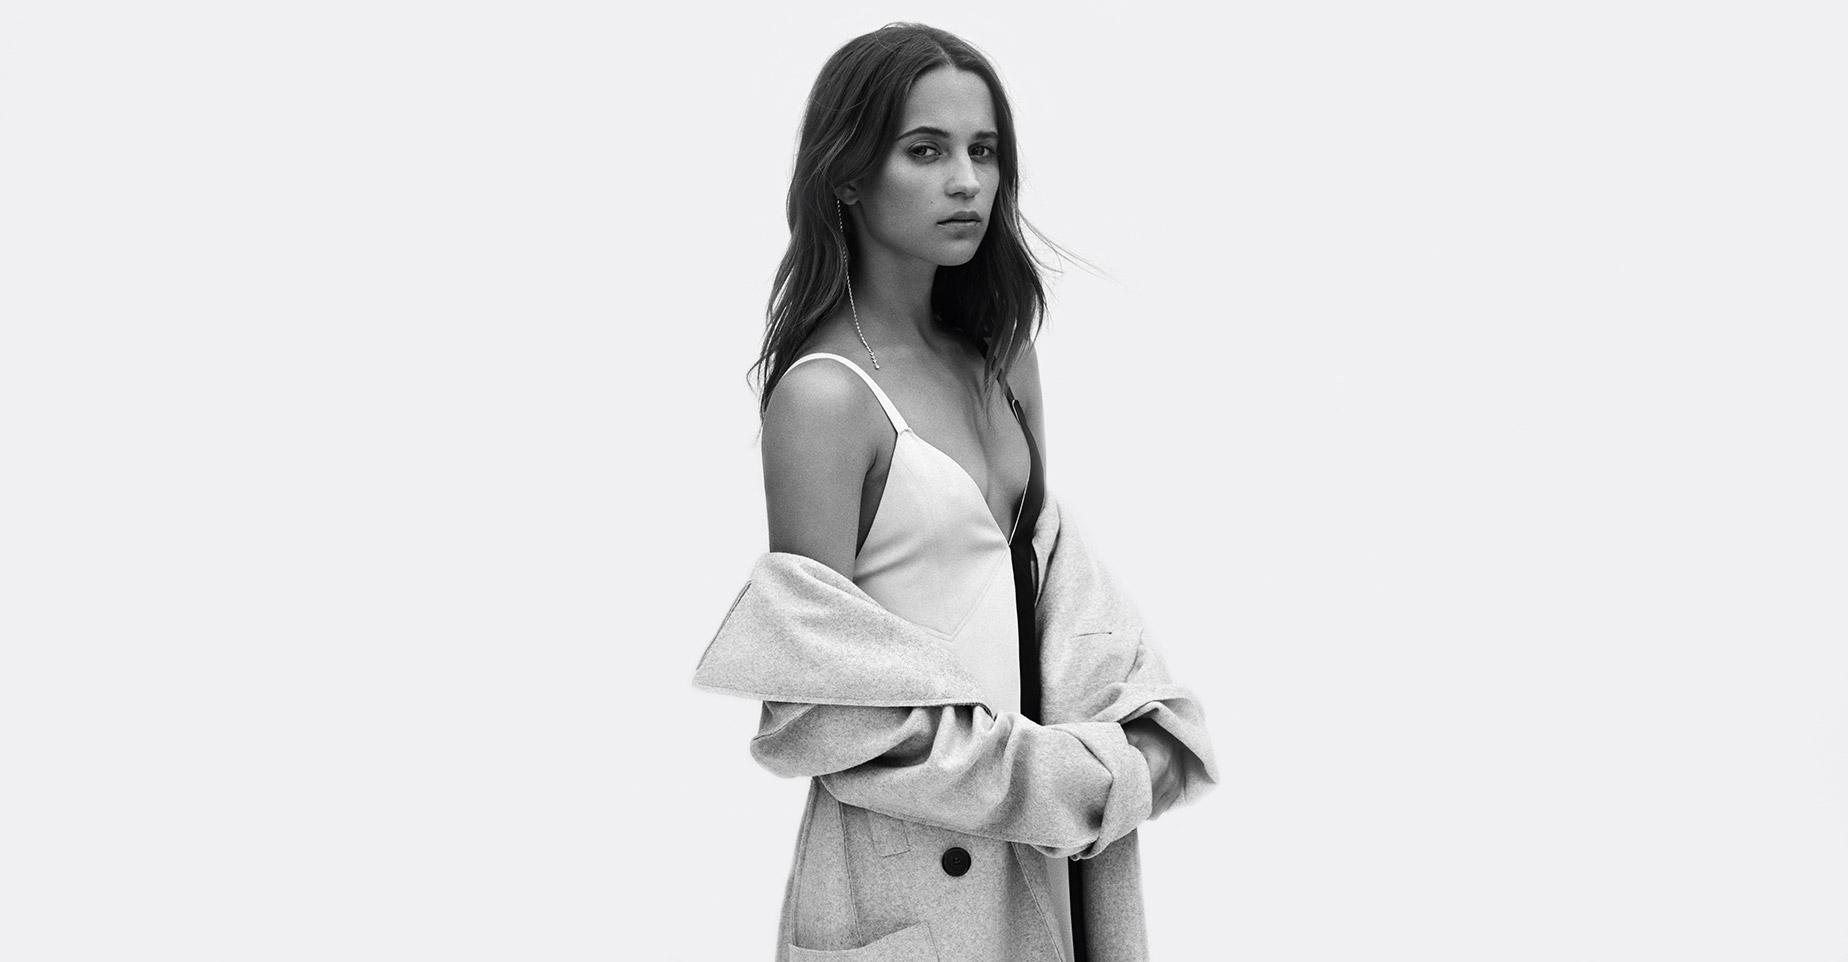 61 Sexy Alicia Vikander Boobs Pictures Will Make Your Mouth Water | Best Of Comic Books